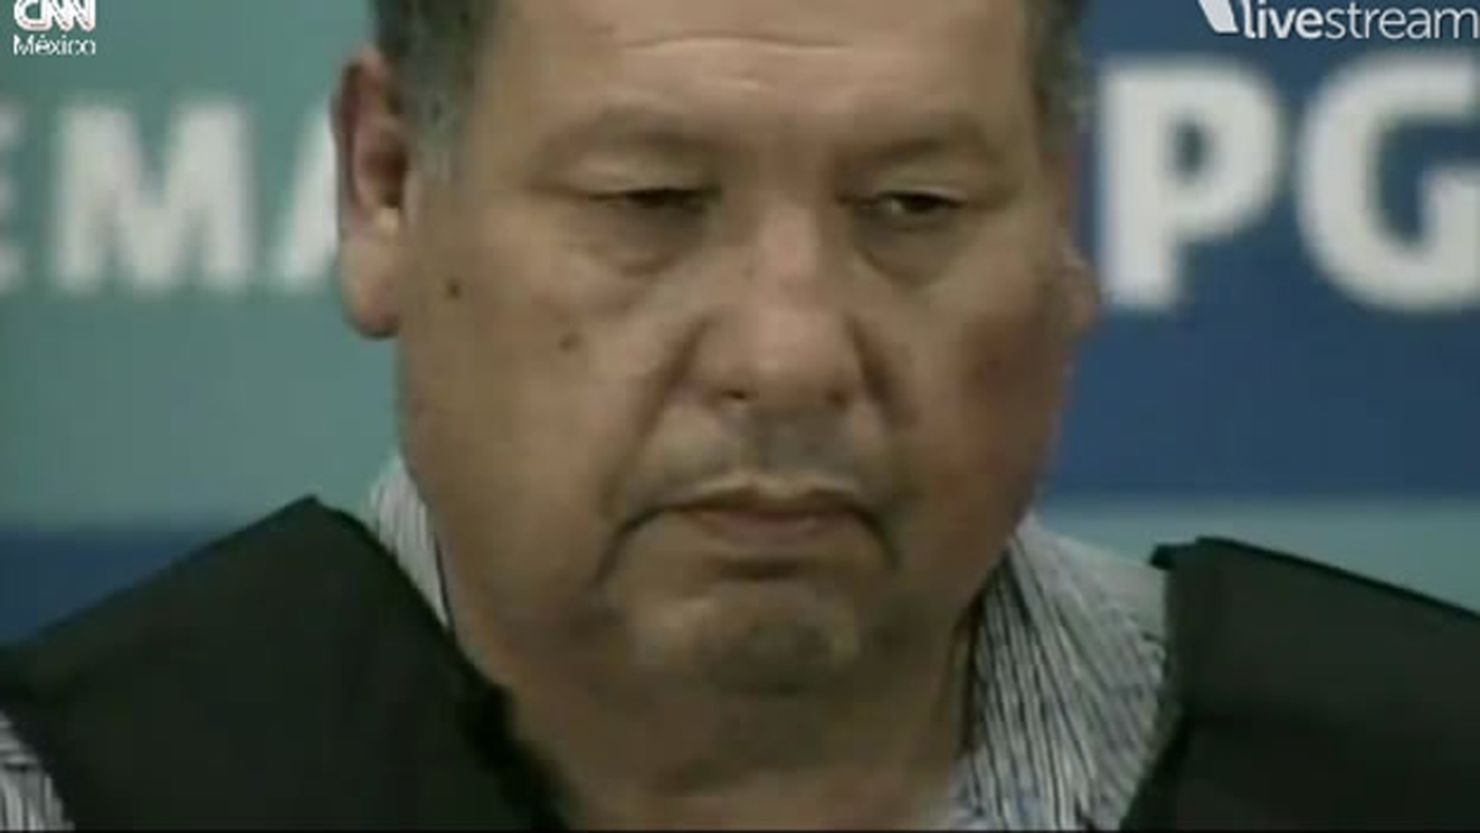 Mexican authorities have captured  a man presumed to be Mario Cardenas Guillen, suspected leader of the Gulf cartel.